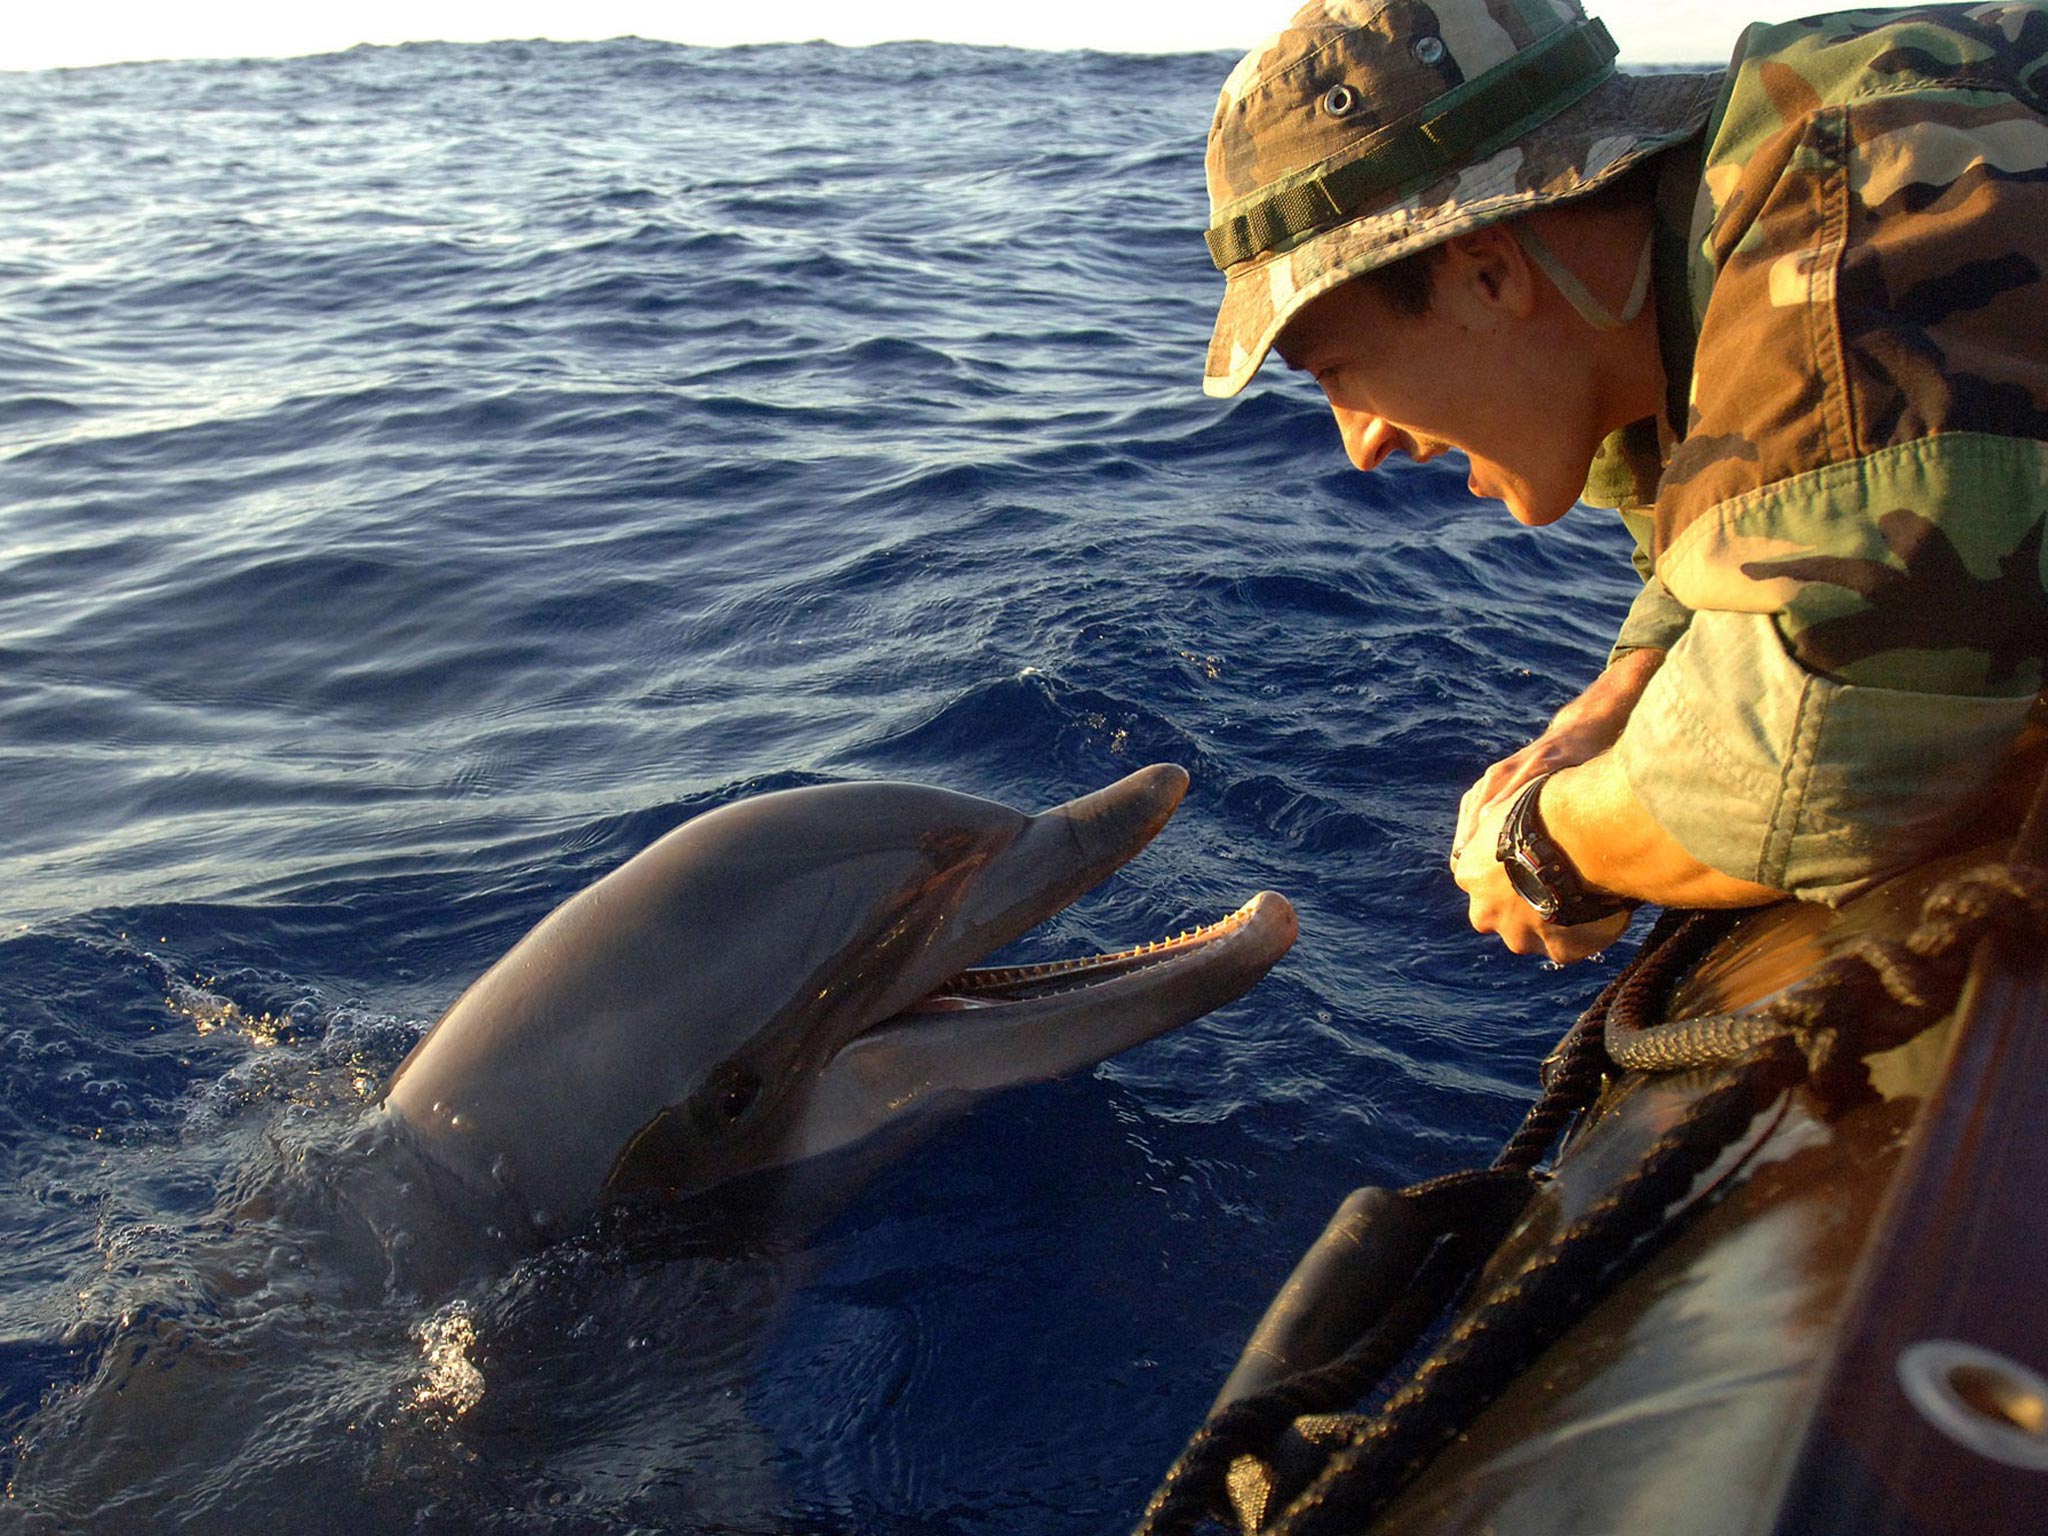 Dolphin duty: the US Navy has a force of 75 Pacific bottlenose
dolphins trained to find mines